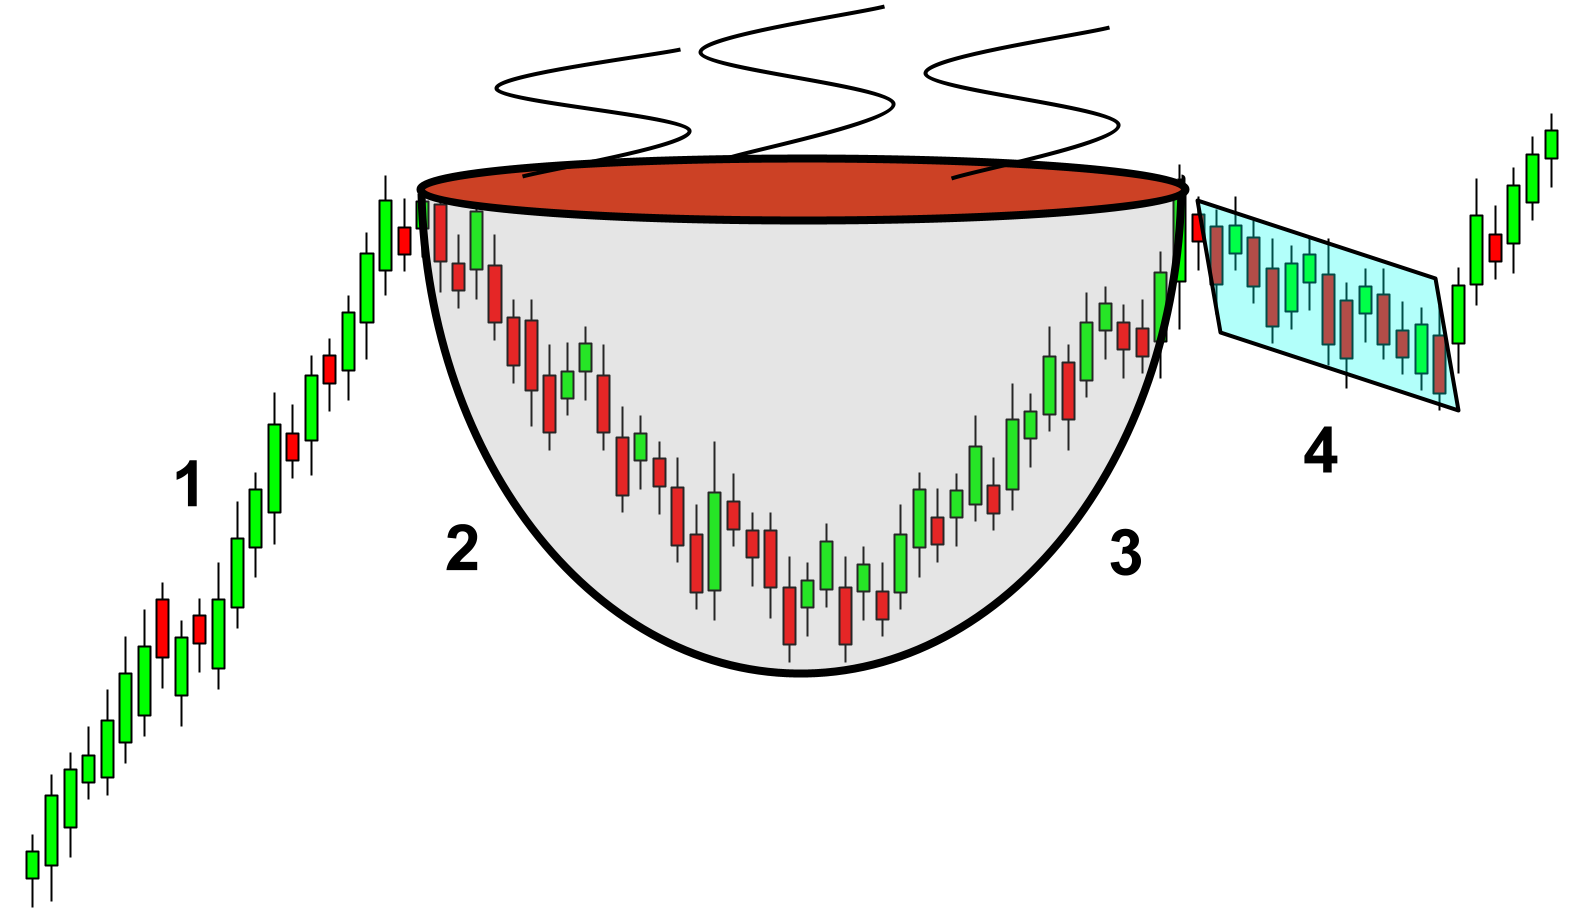 The cup and handle shape and the four key components for the pattern